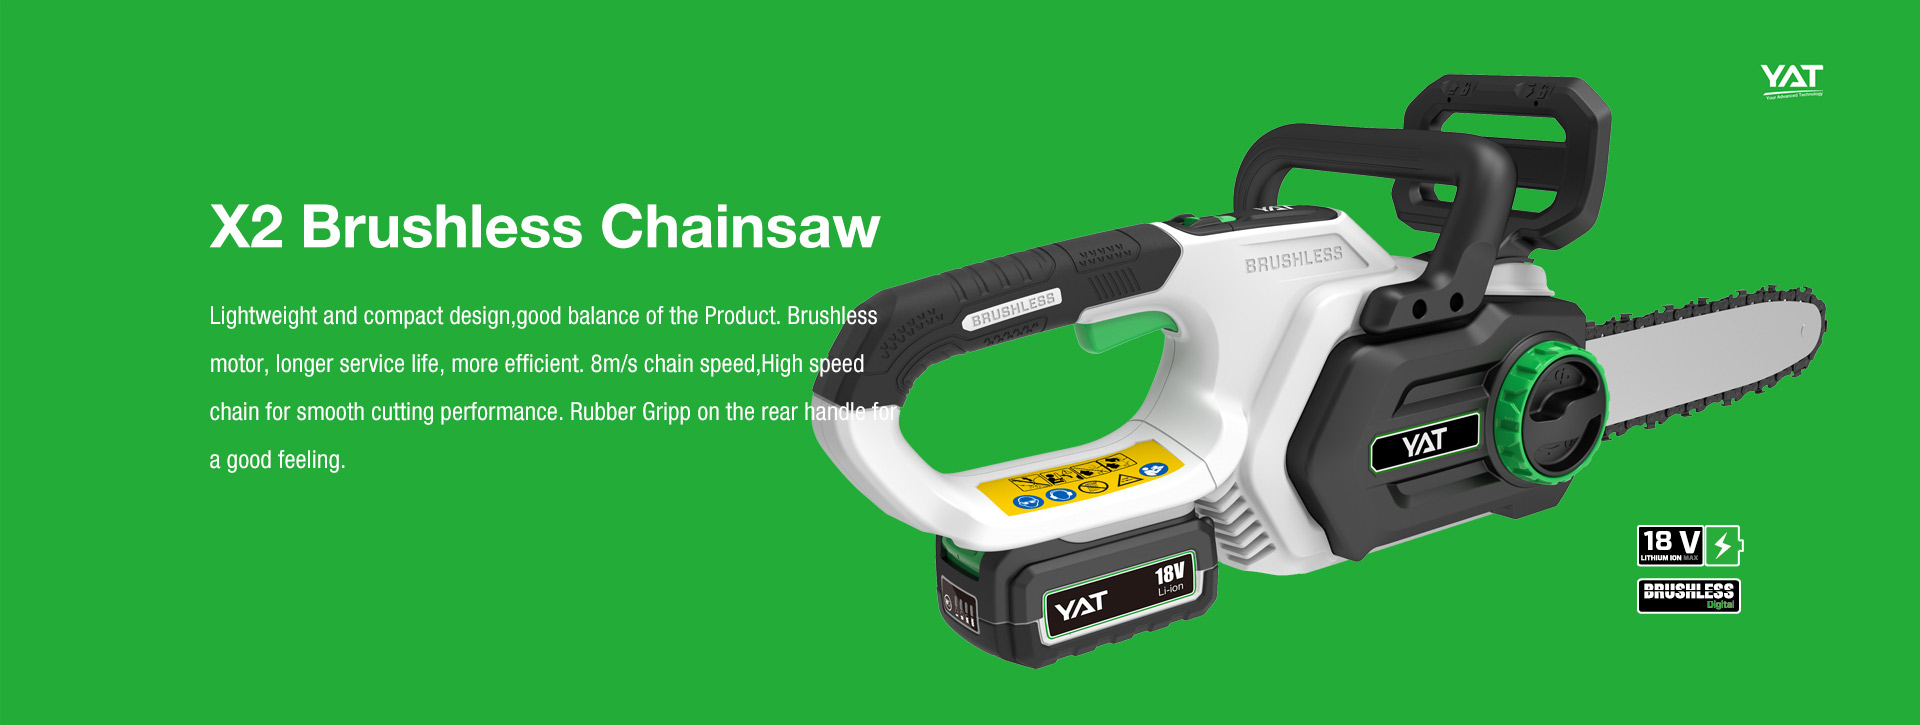 X2 BRUSHLESS CHAINSAW